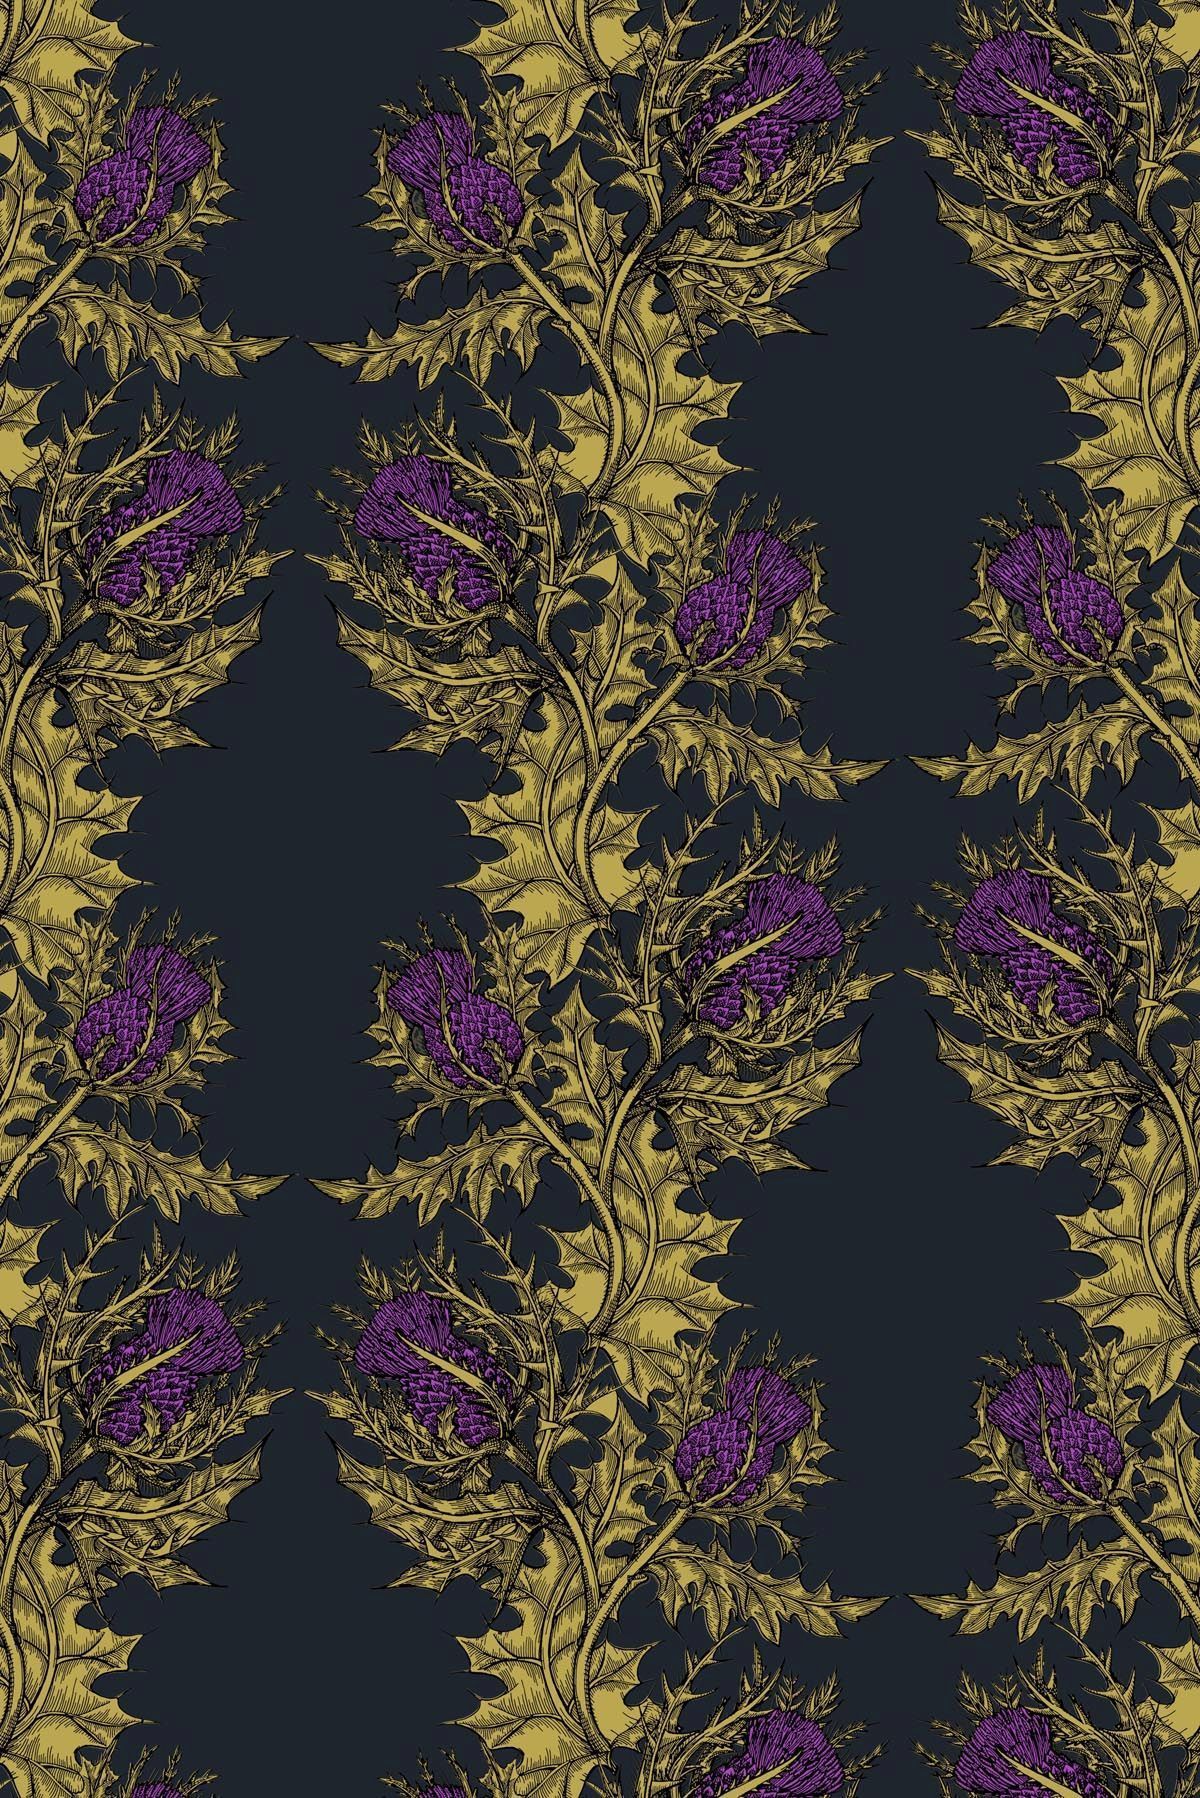 Grand thistle wallpaper from.co.uk